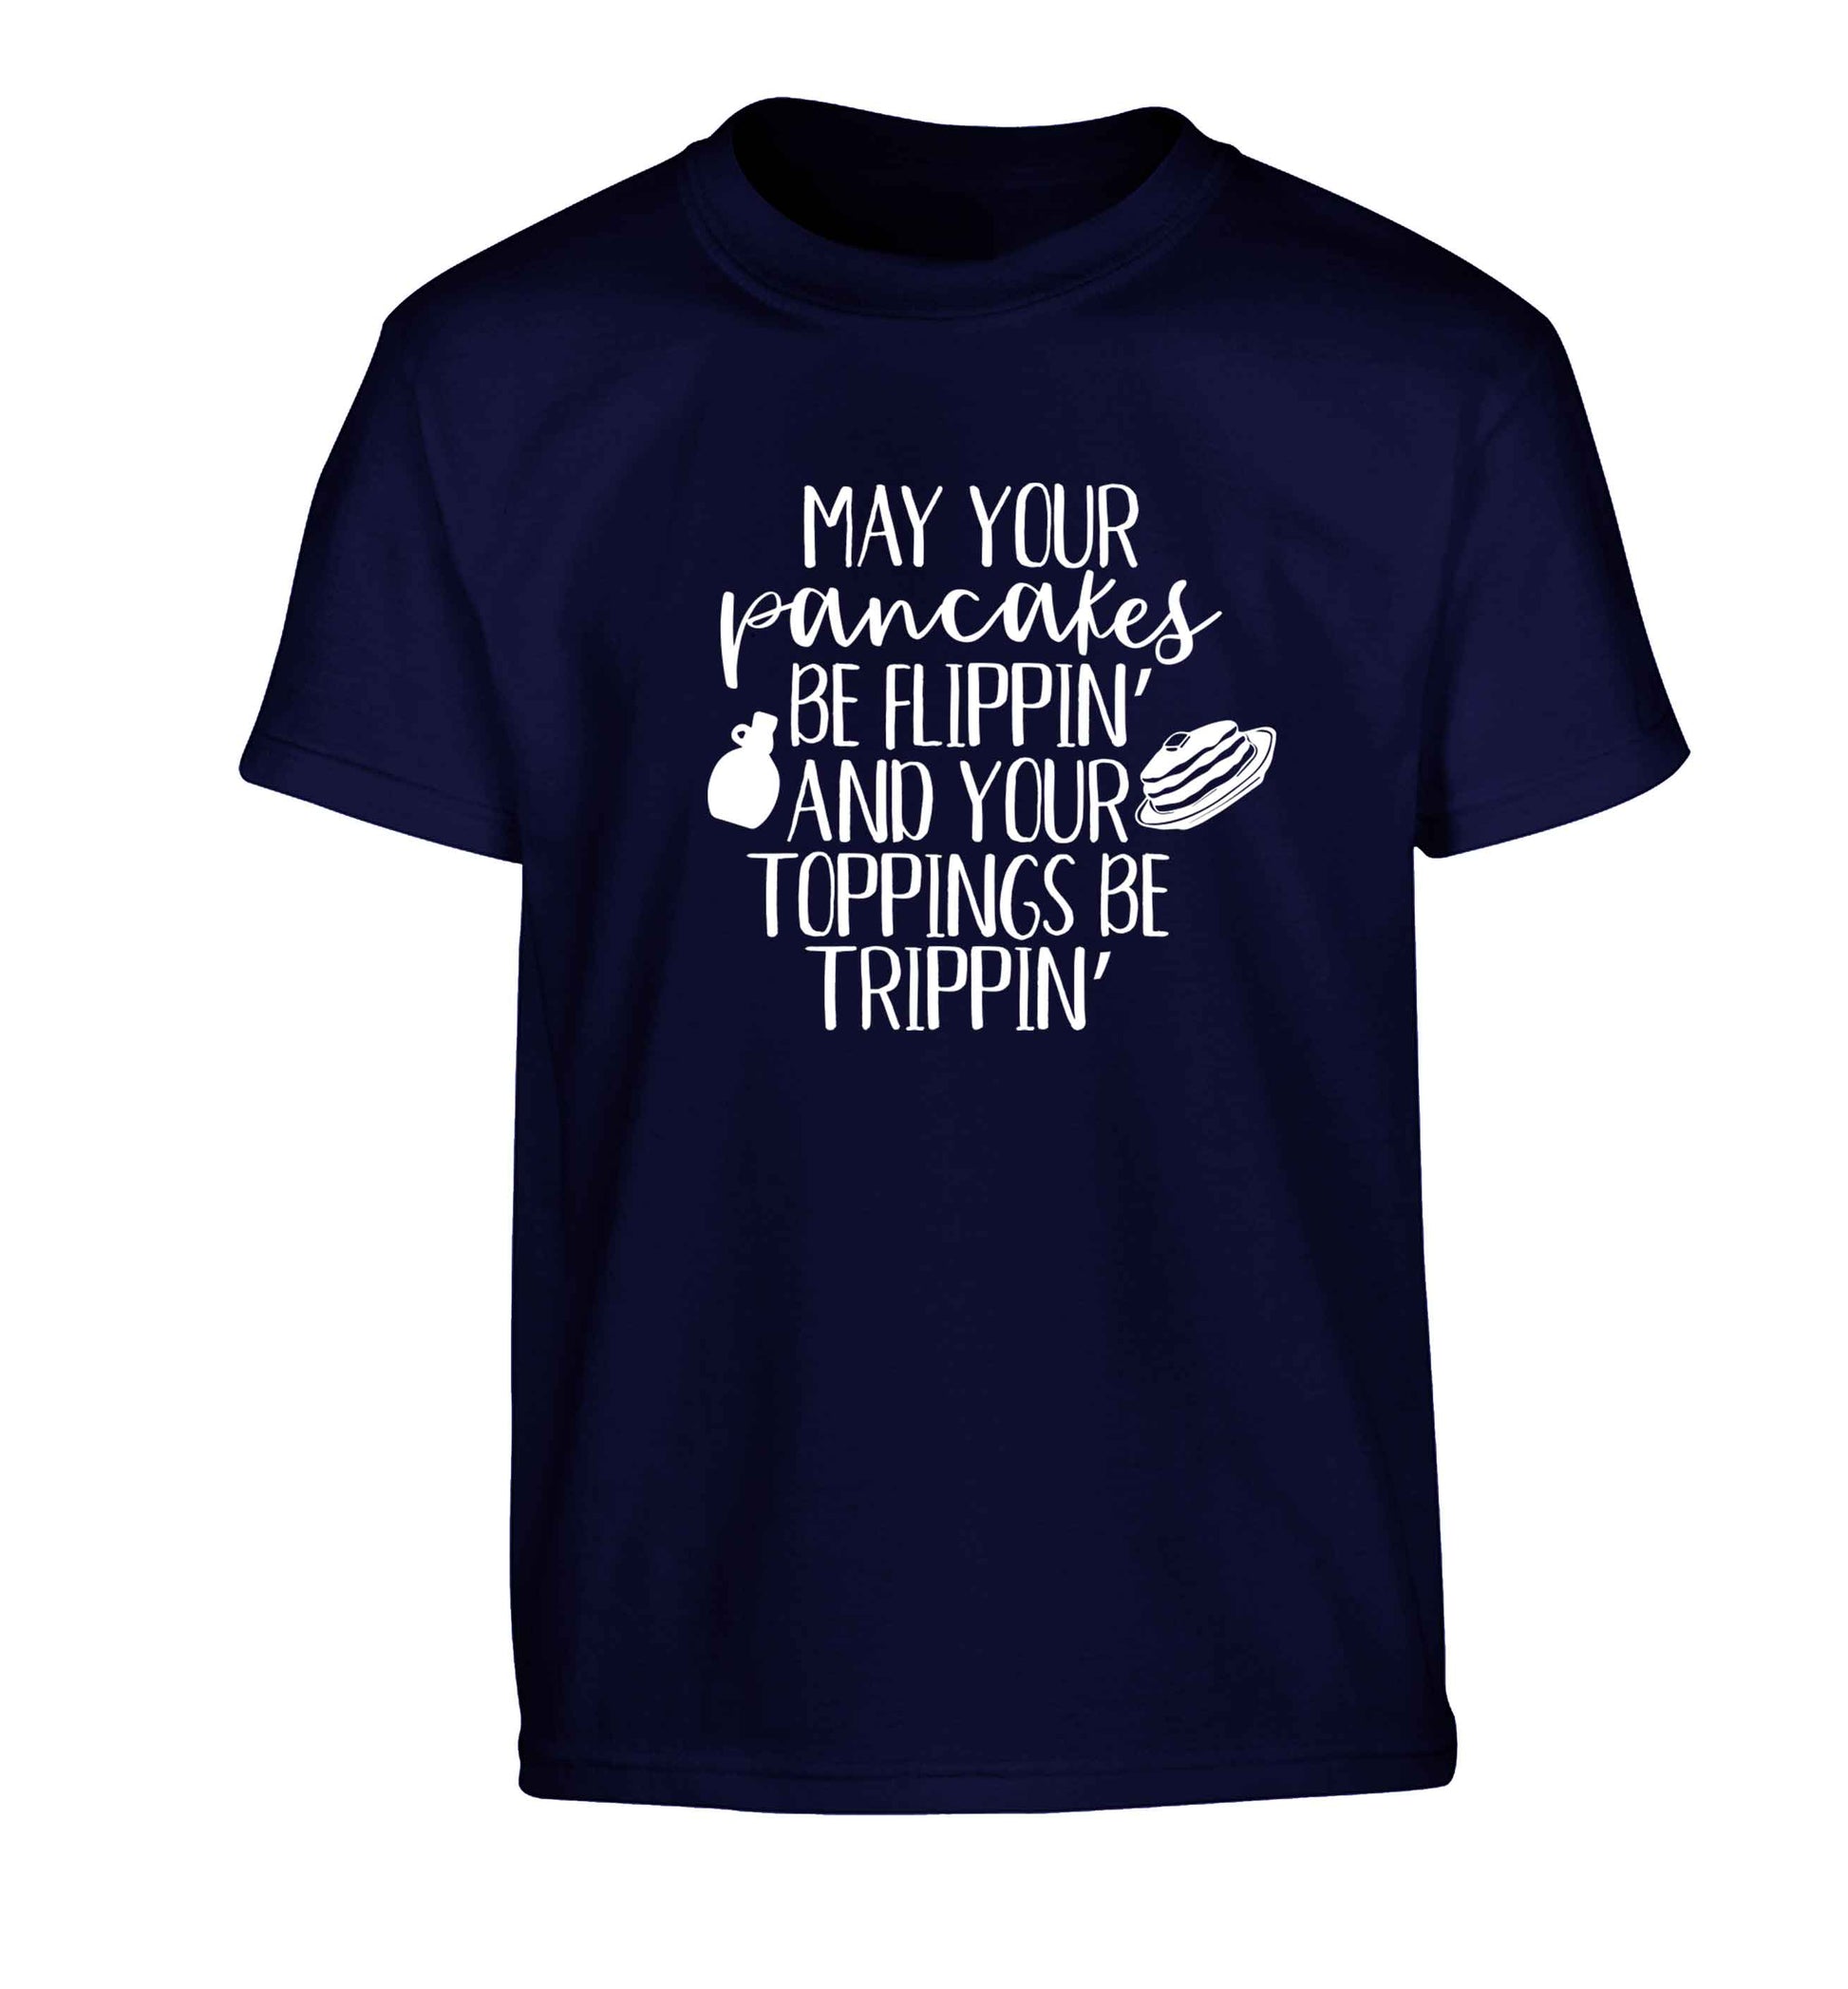 May your pancakes be flippin' and your toppings be trippin' Children's navy Tshirt 12-13 Years